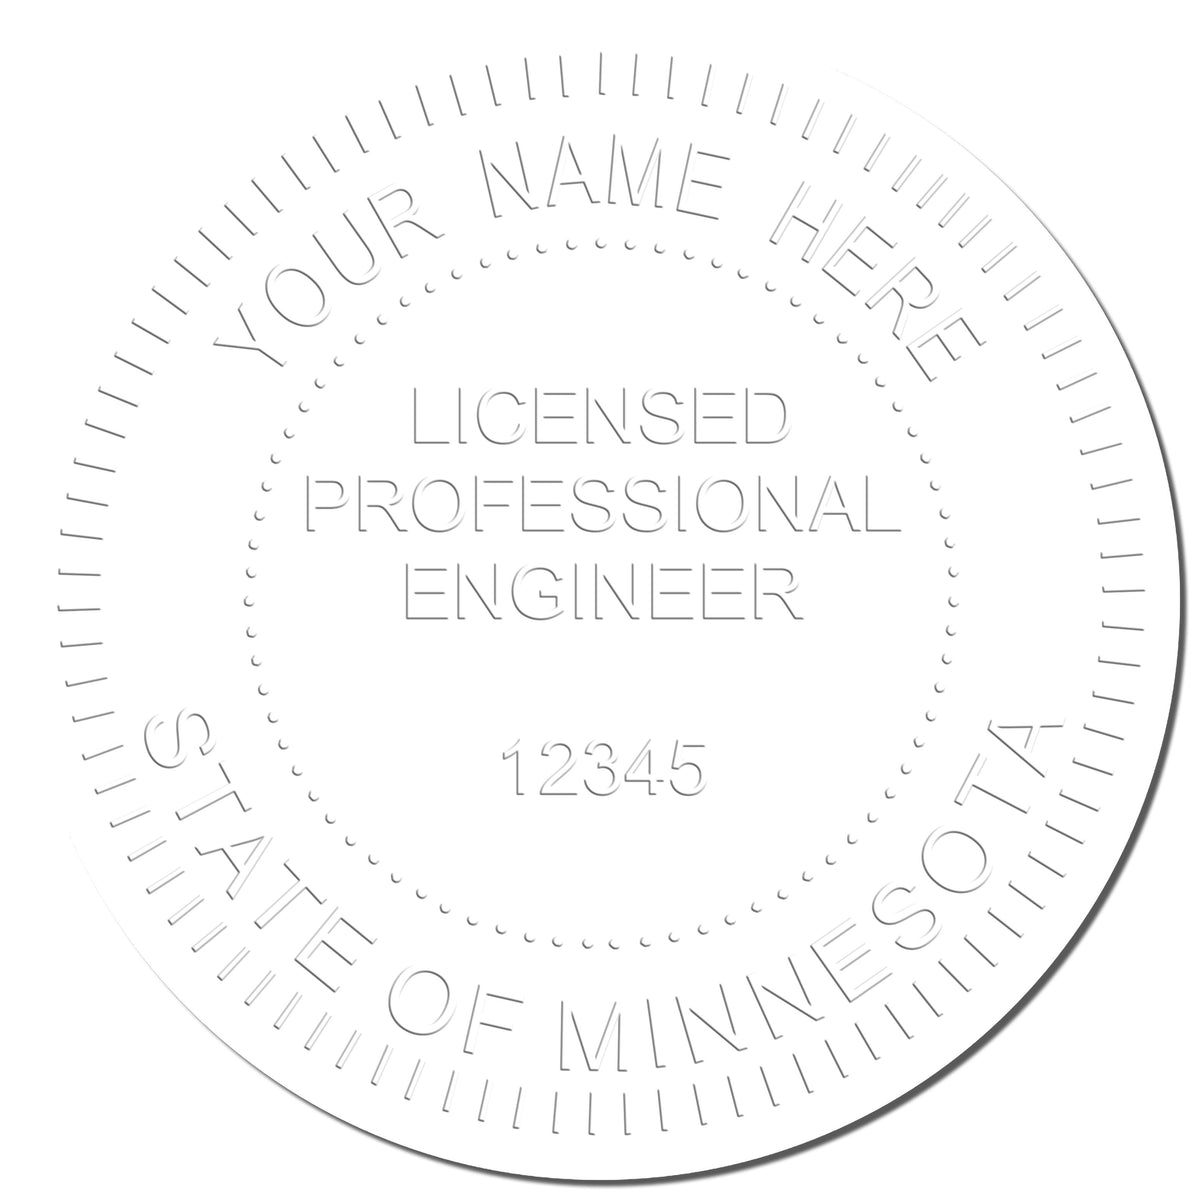 Another Example of a stamped impression of the Minnesota Engineer Desk Seal on a piece of office paper.